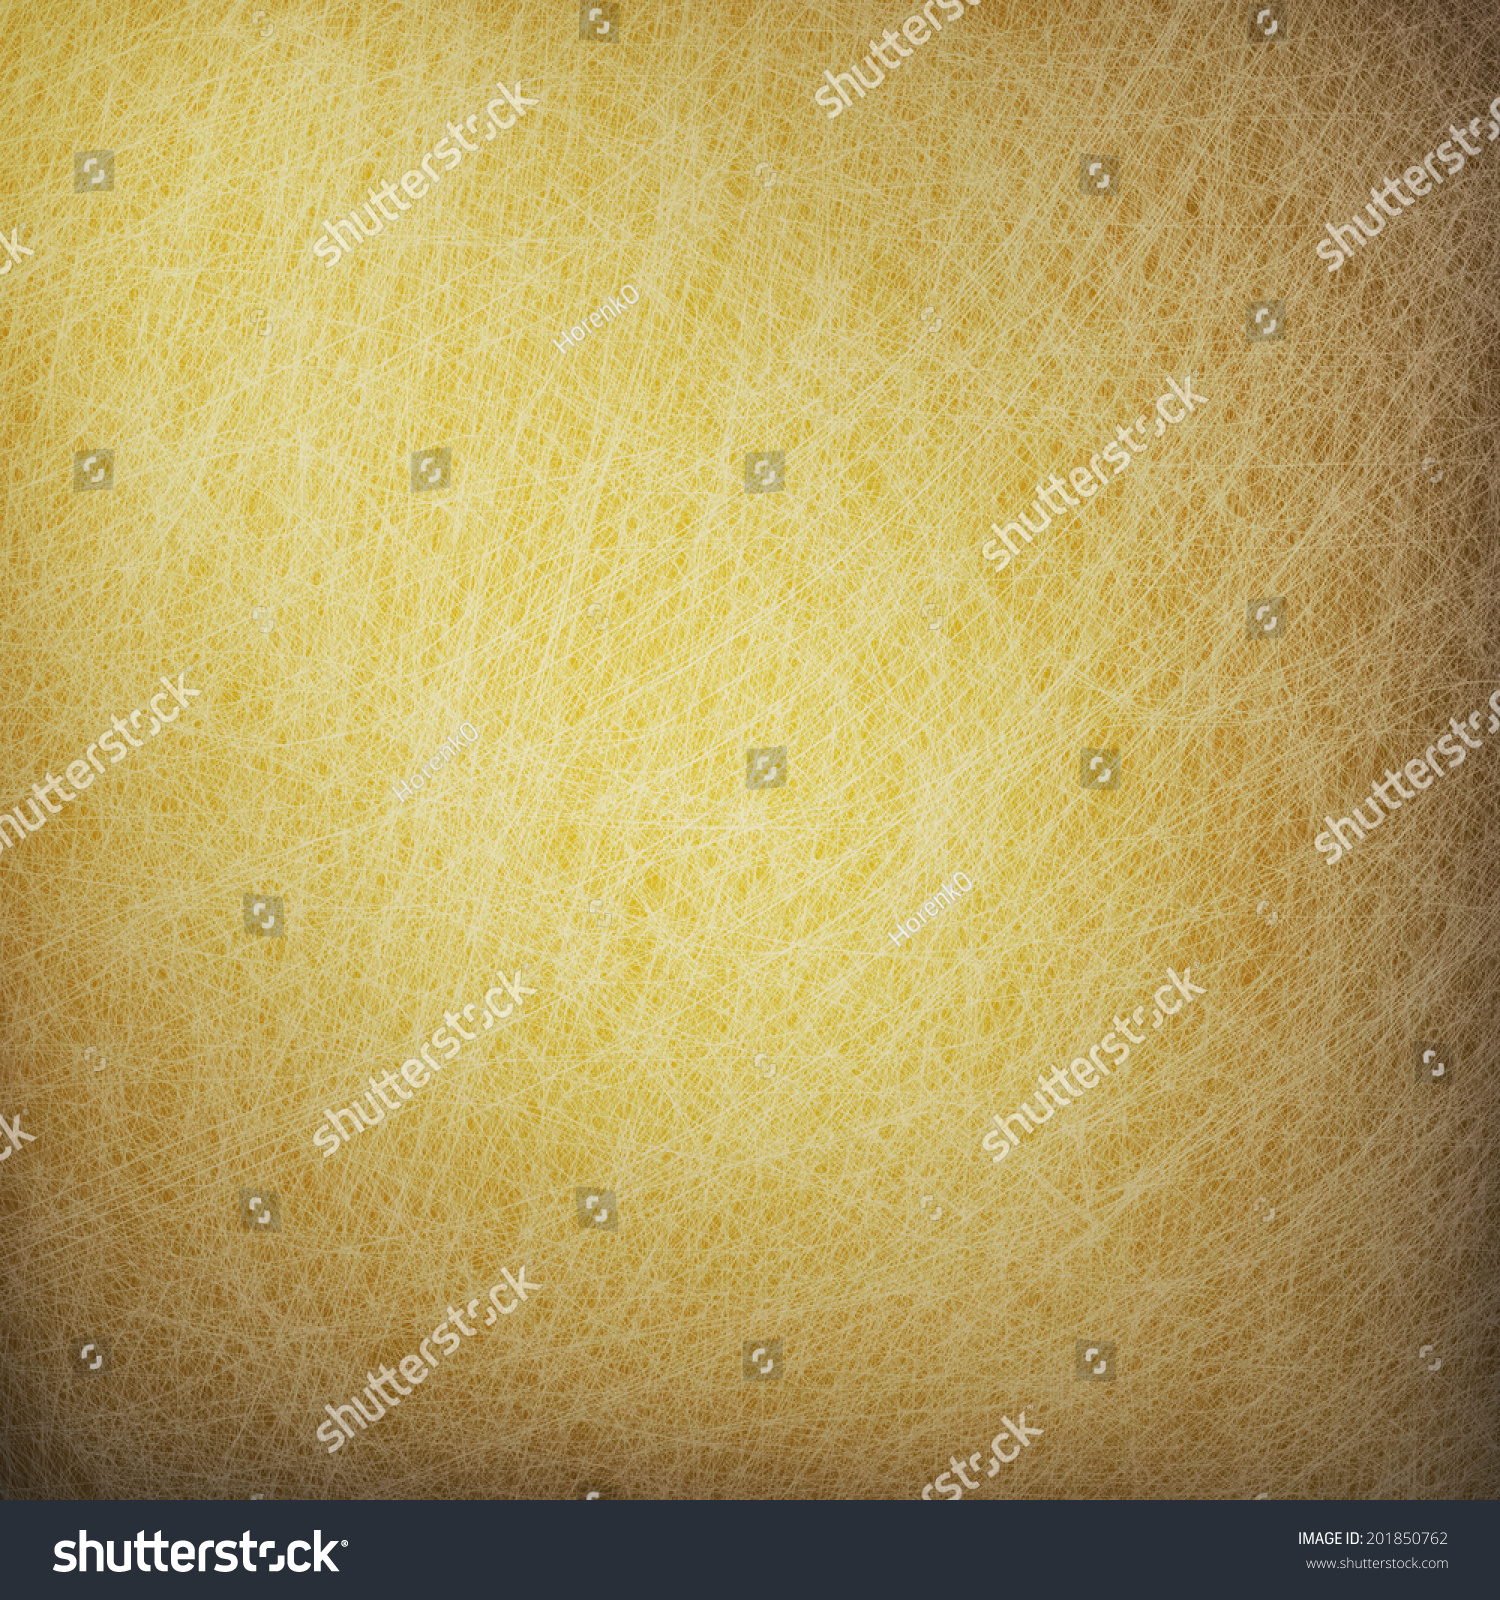 Detailed texture for background #201850762